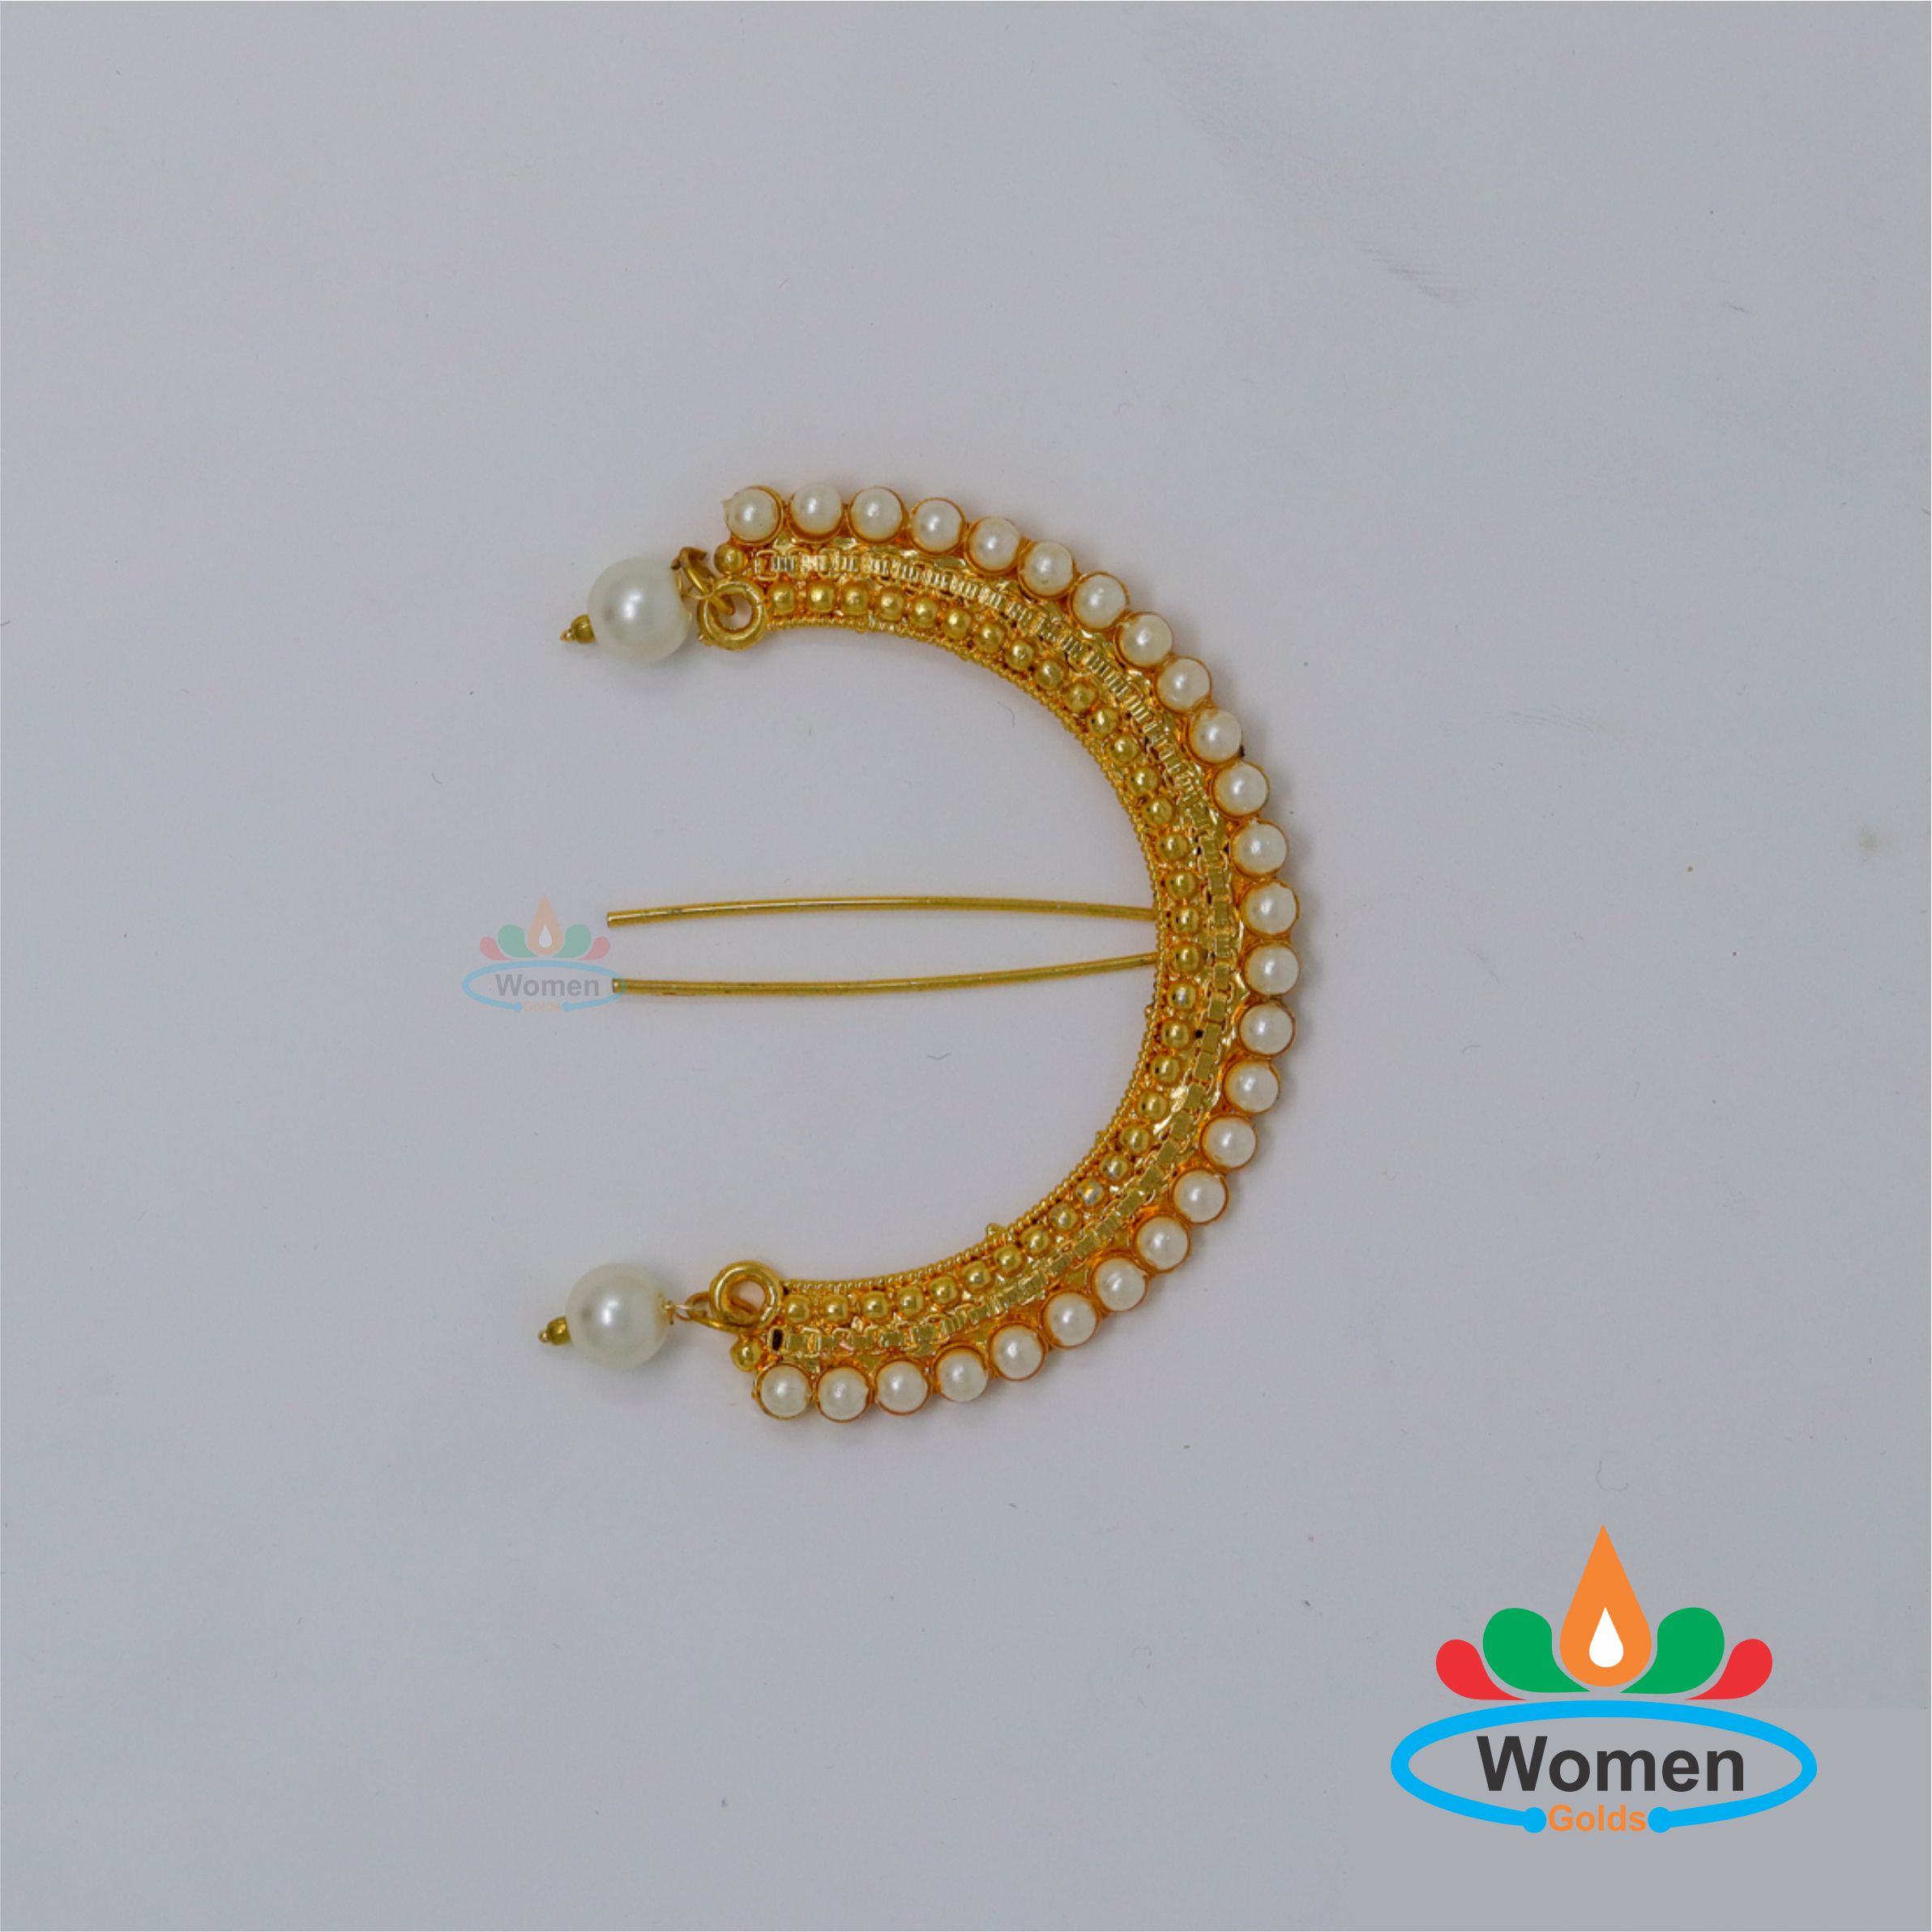 One Gram Gold Jewellery Designs With Price.